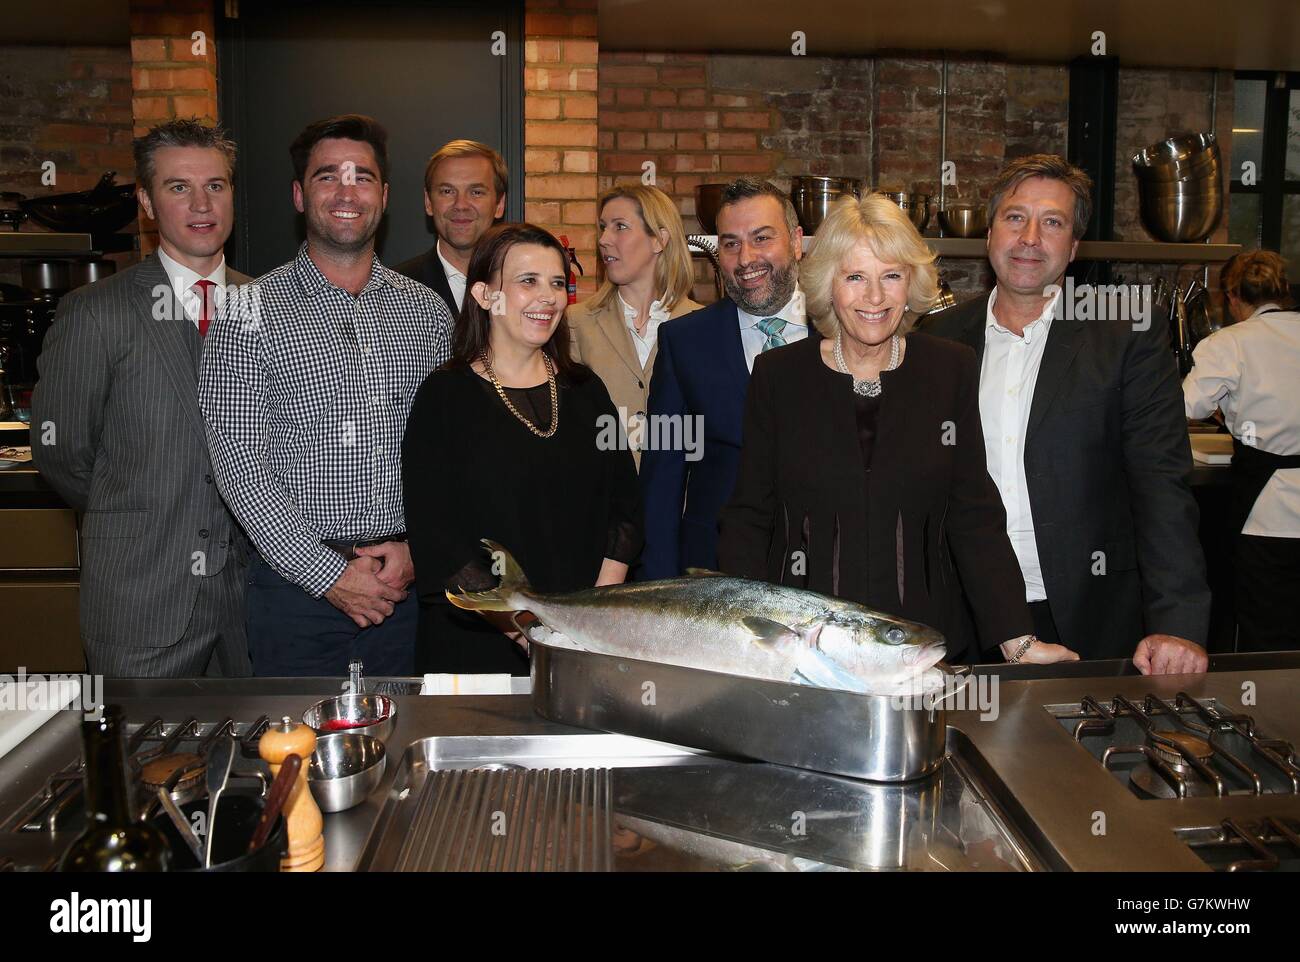 The Duchess of Cornwall poses for a photograph with Australian chef Lynton Tapp (second left) and Rachel O'Sullivan, John Torode, Bill Granger, Luke Rayment, Christian Honor and Clare Smyth during a cooking demonstration at an Australian Day Reception at The Violin Factory in London. As well as Australian cooking the Duchess sampled some Australian wines and met the producers. Stock Photo